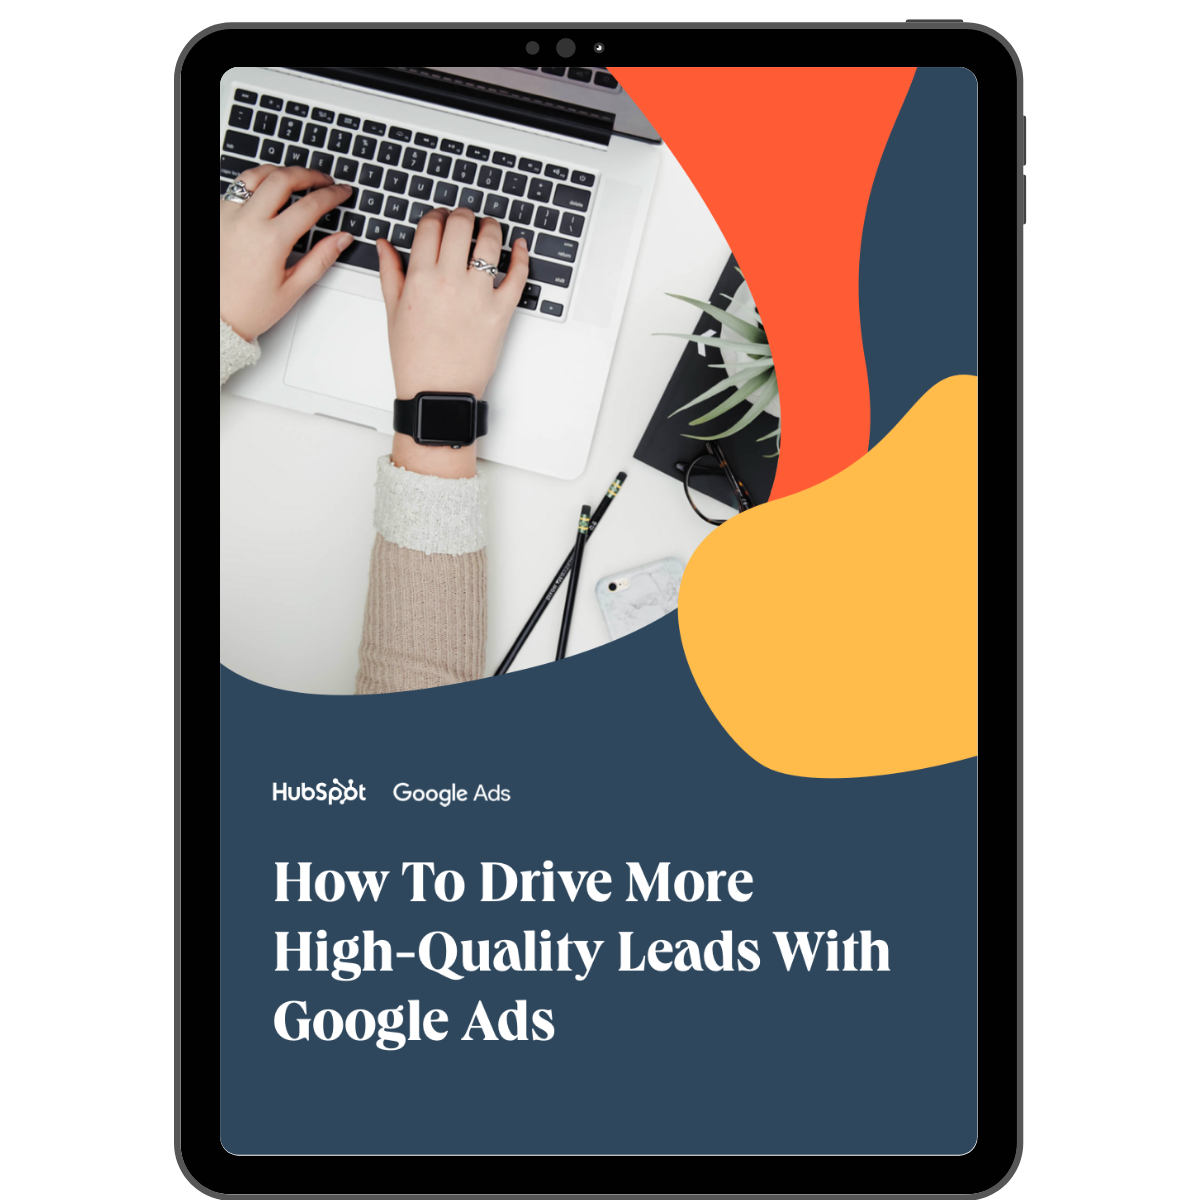 How to drive more high-quality leads with google ads (1)